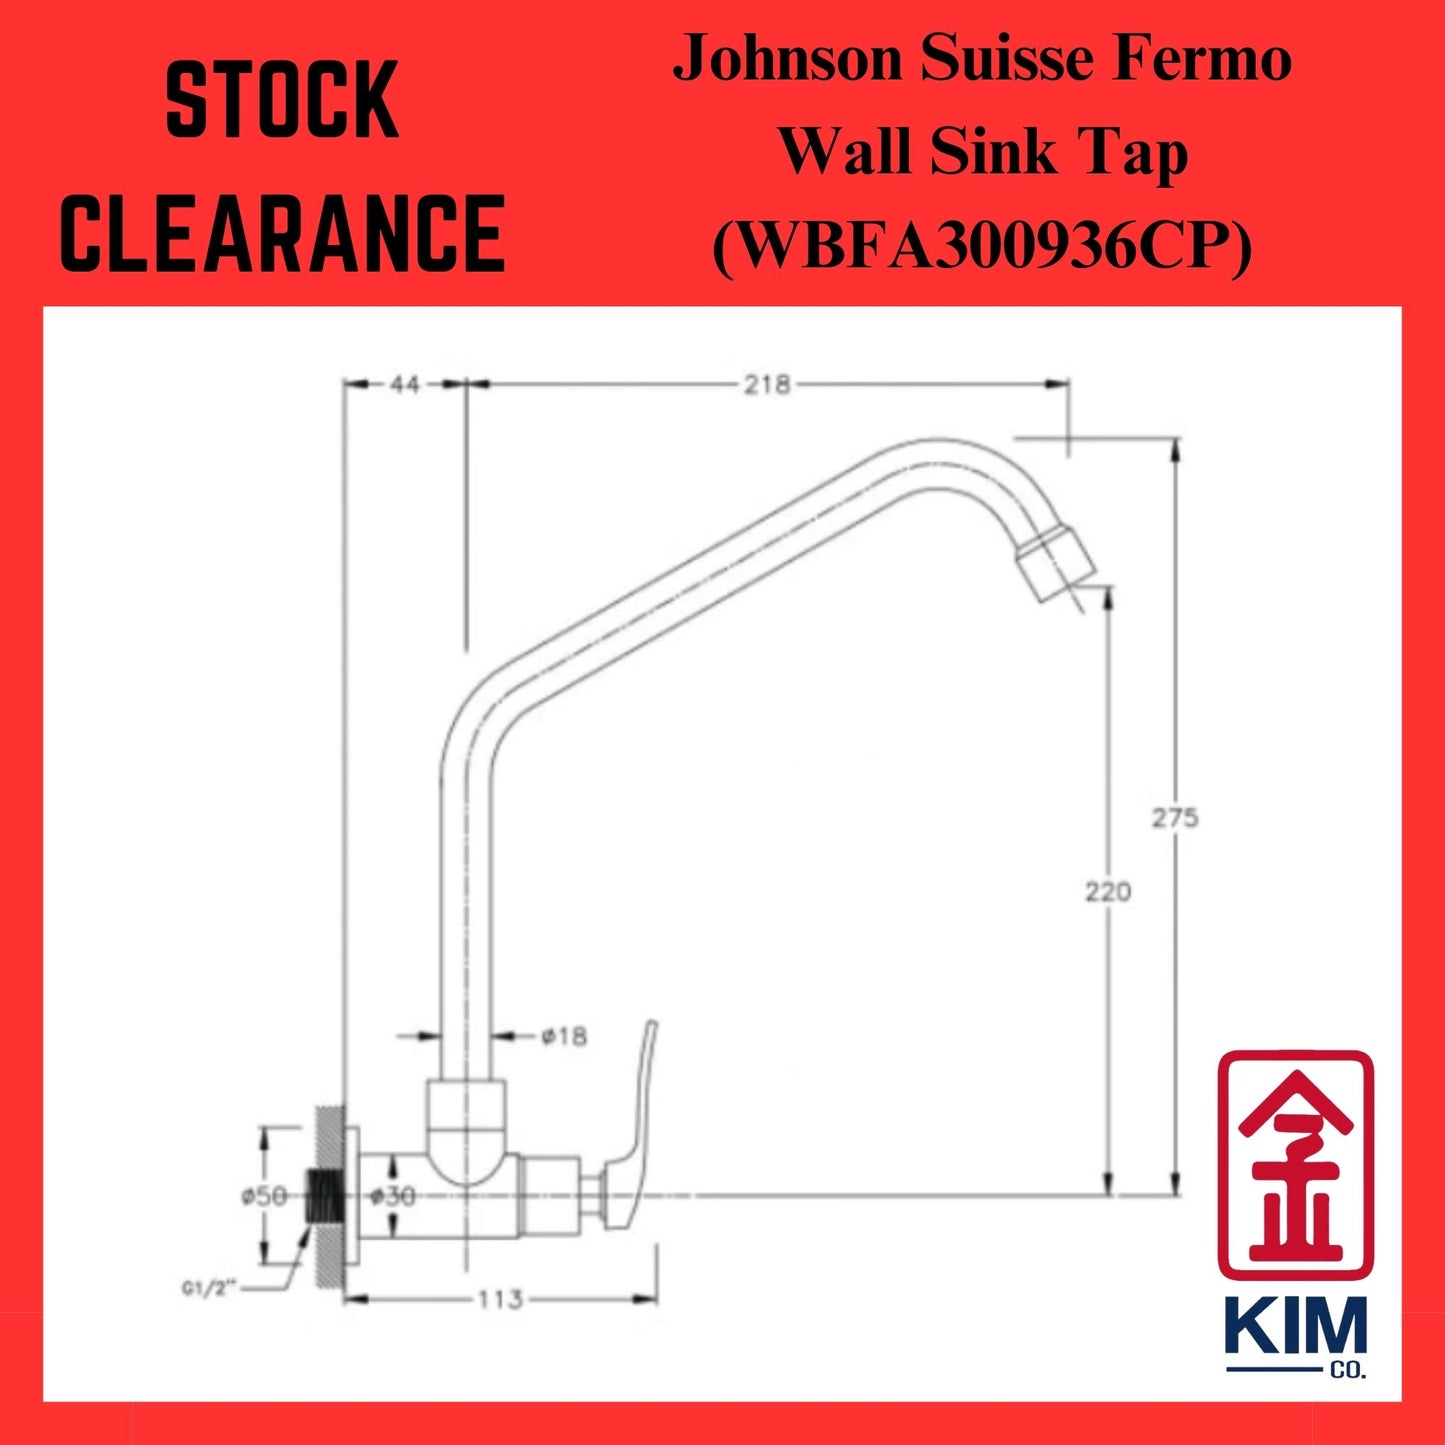 ( Stock Clearance ) Johnson Suisse Fermo Wall Mounted Kitchen Sink Tap (WBFA300936CP)